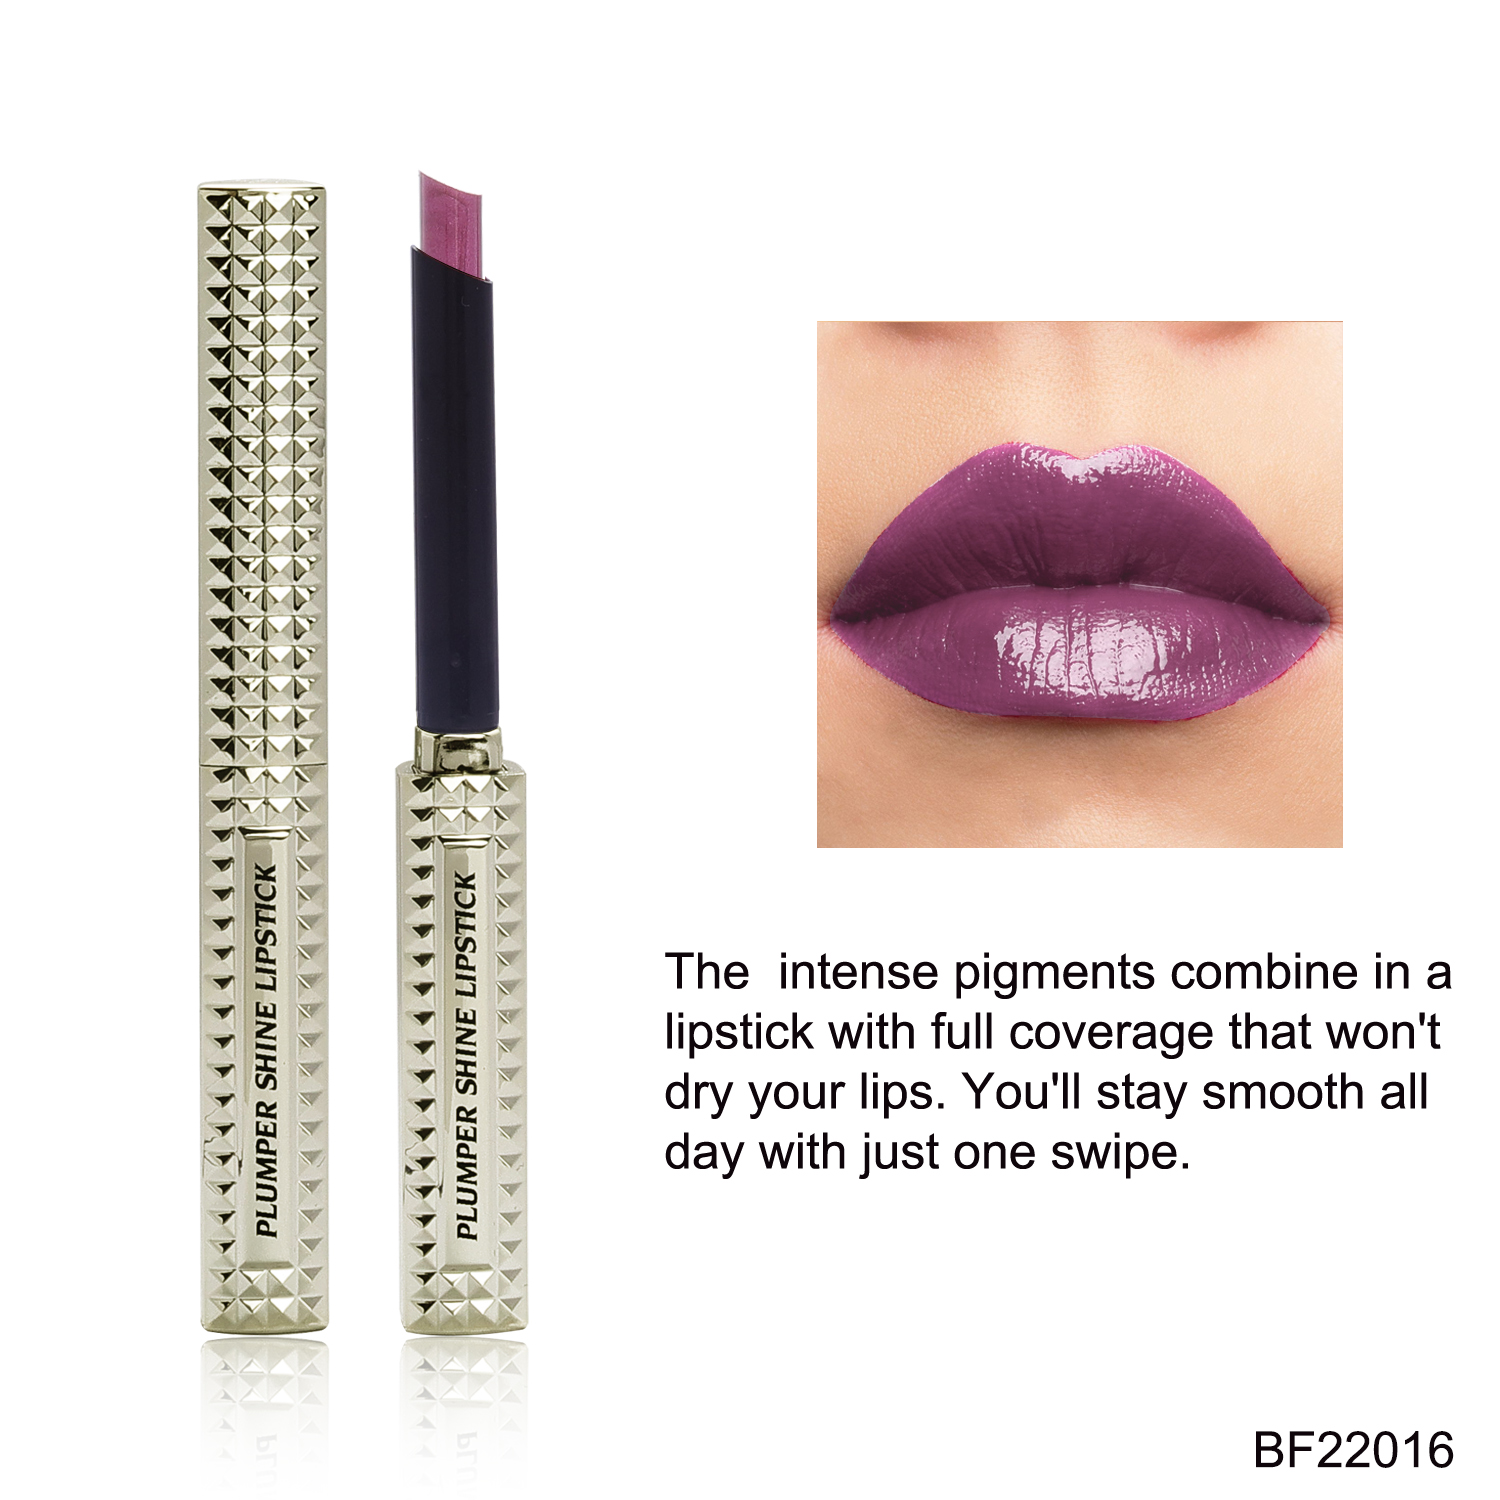 22016(1)Highly pigmented lipstick